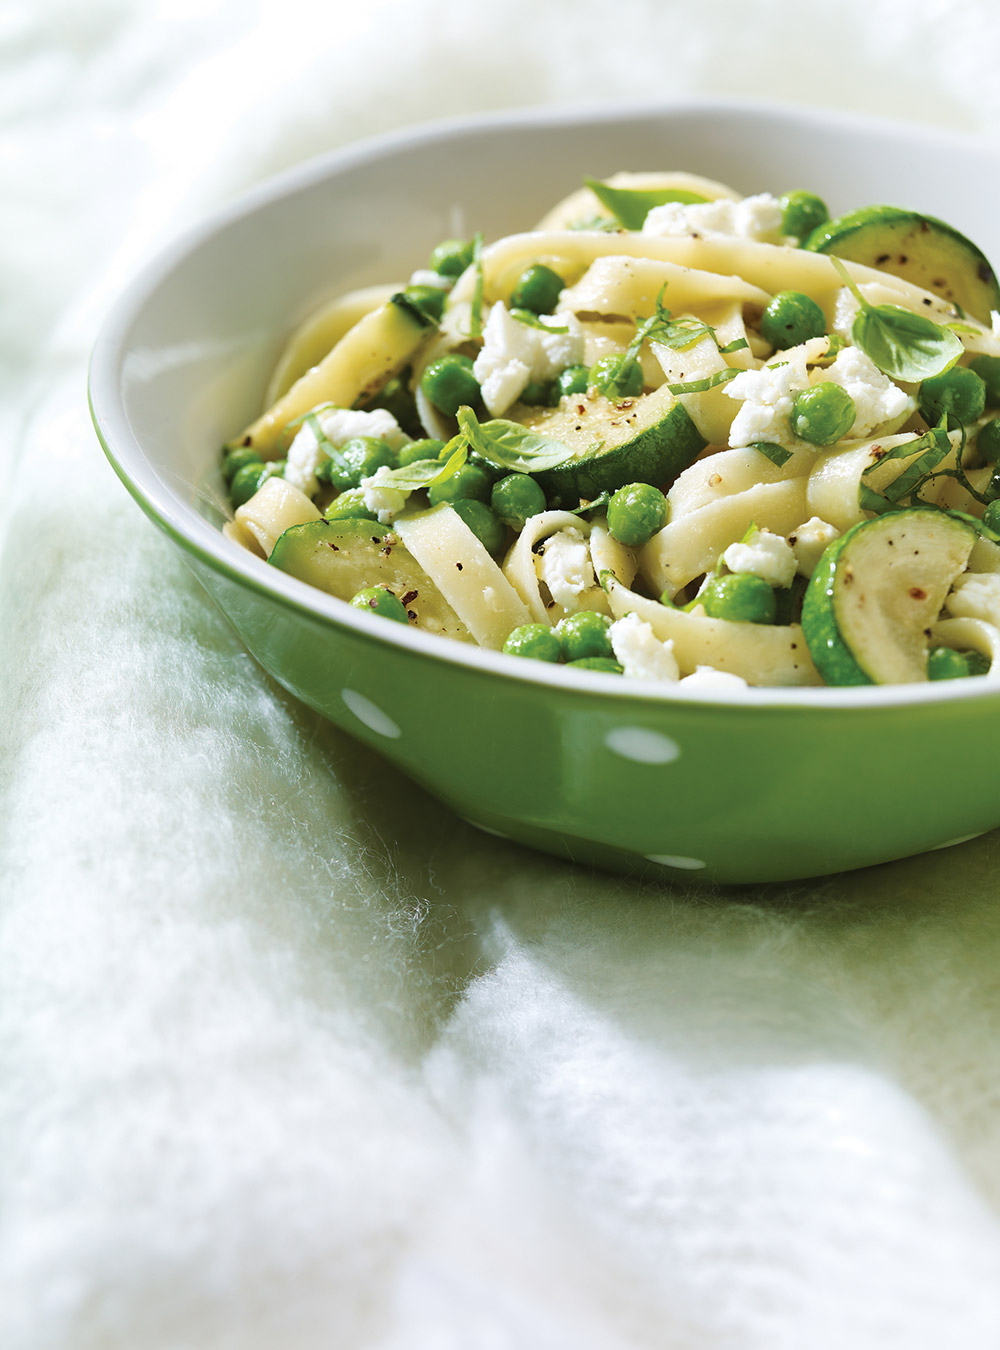 Fettuccine with Peas, Zucchini and Goat Cheese